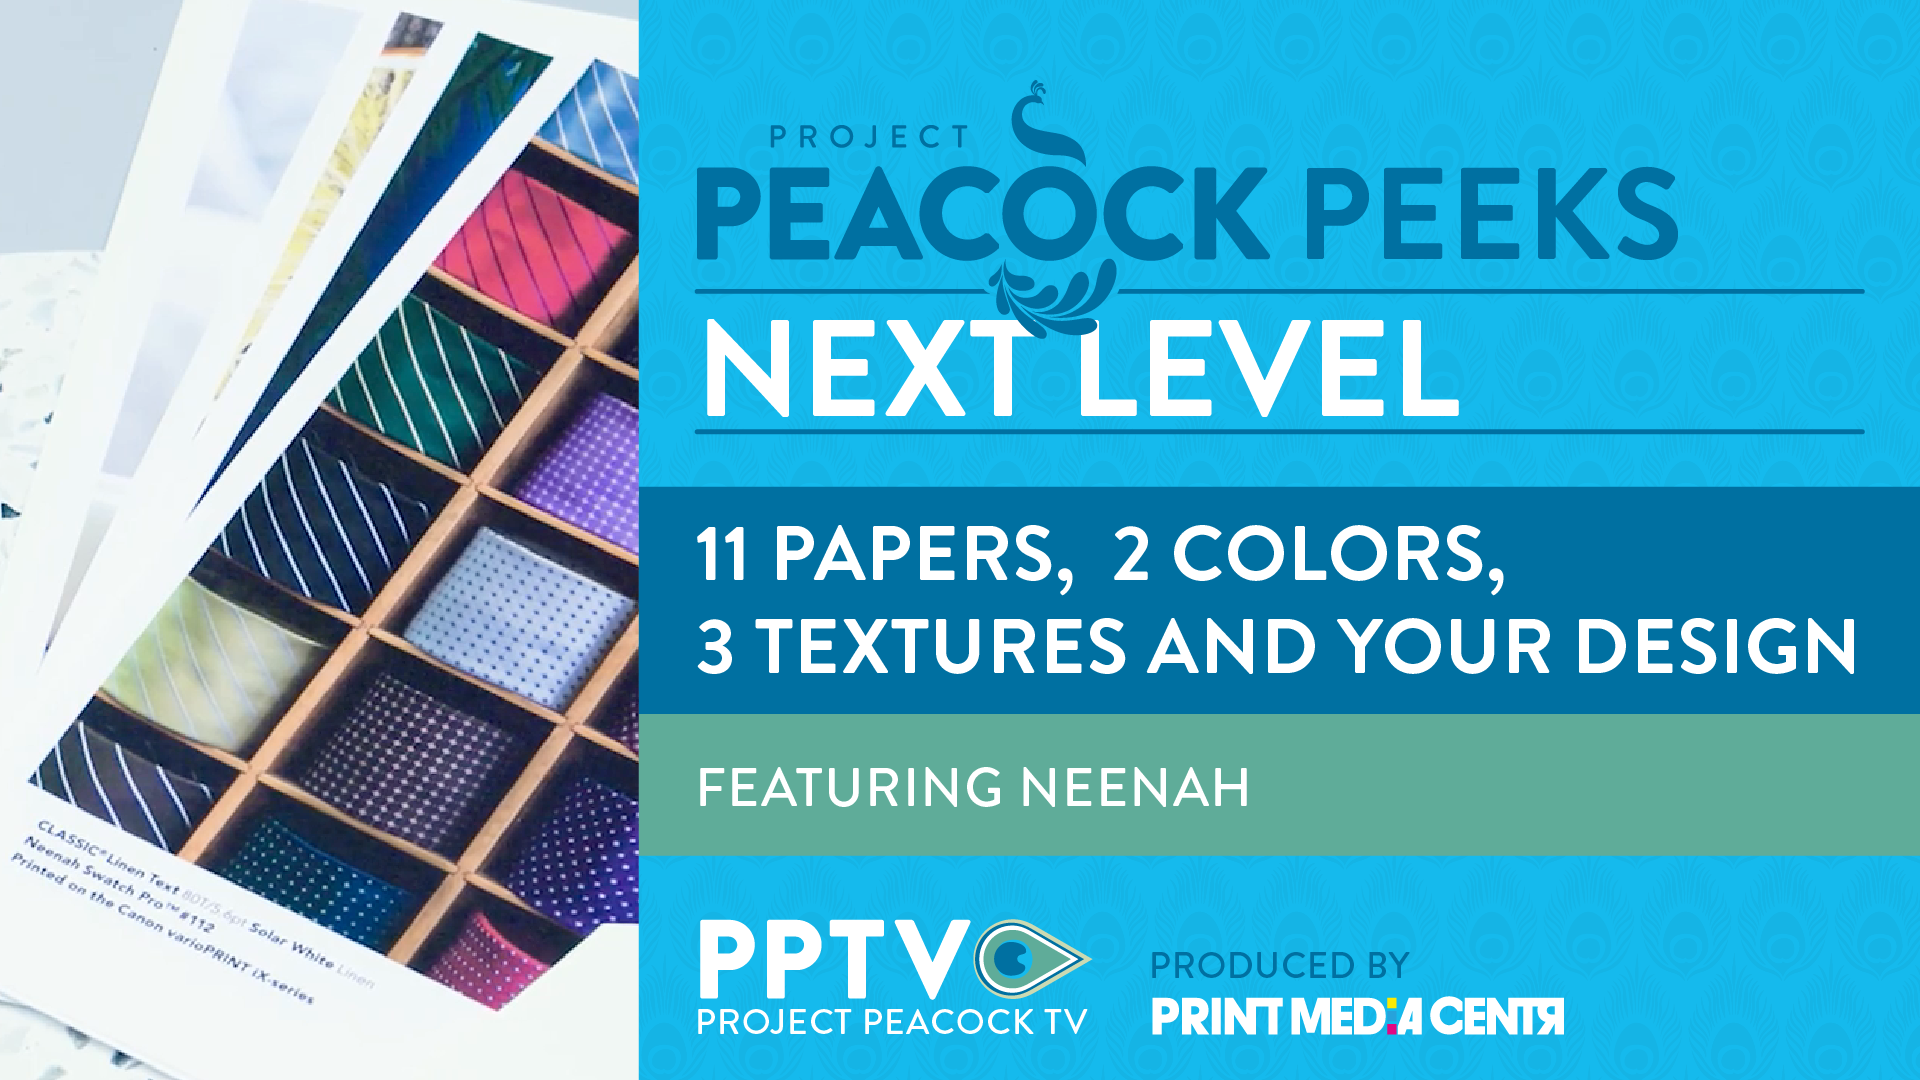 Next Level Papers for Next Level Inkjet Production Printing